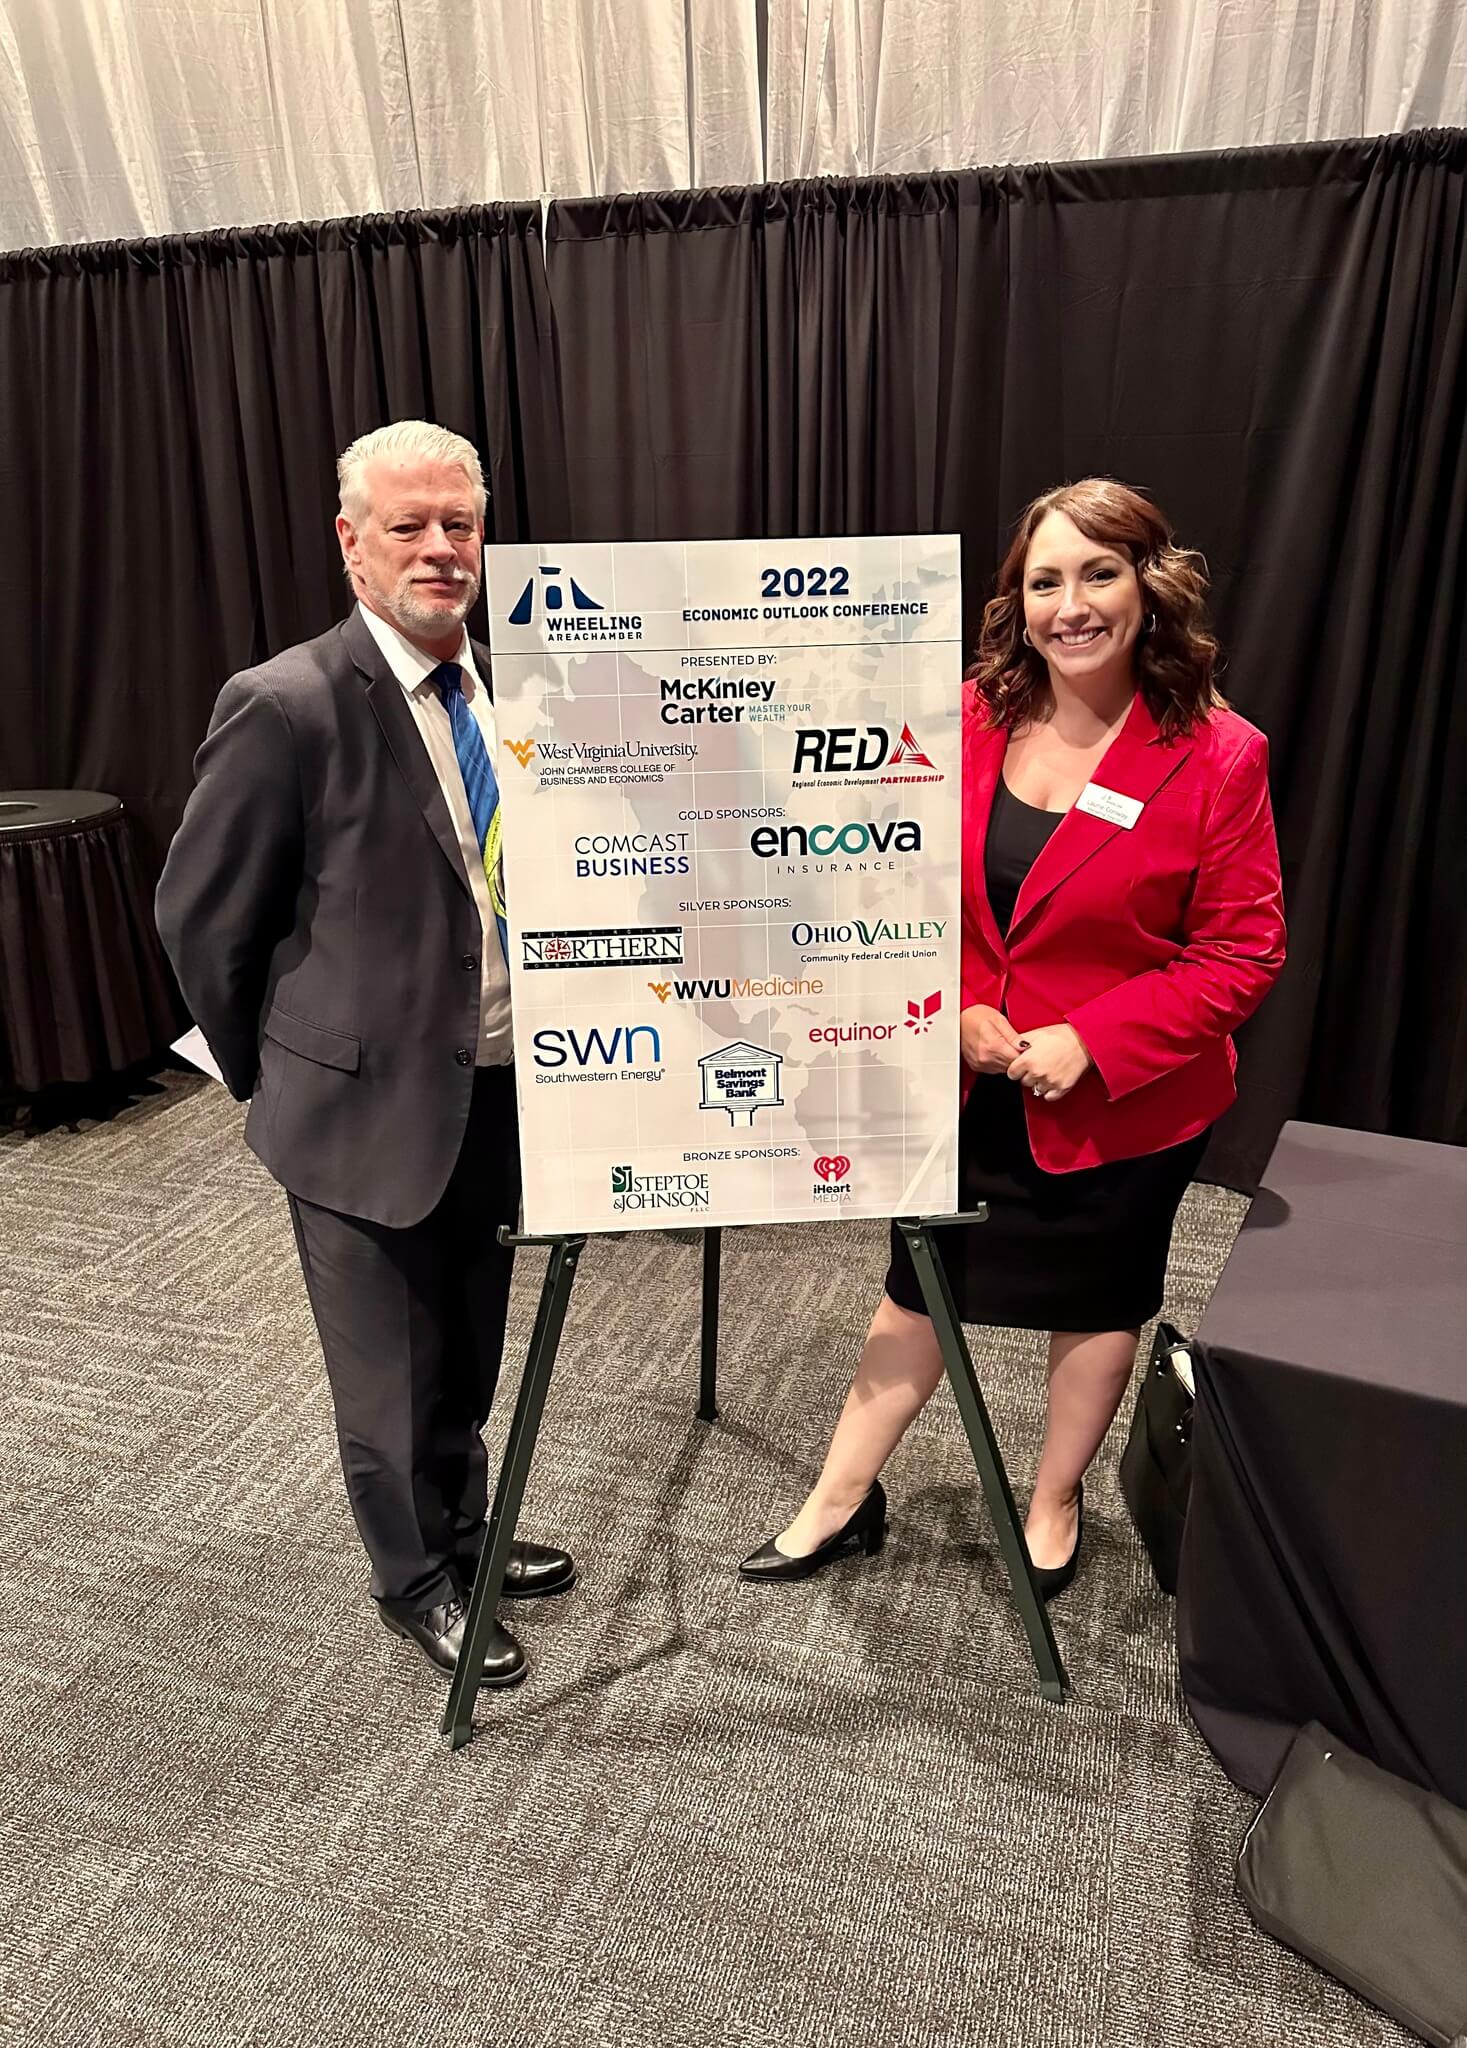 VP of Membership, Events and Education Mike Howard and Marketing Director Laurie Conway at the 2022 Economic Outlook Conference